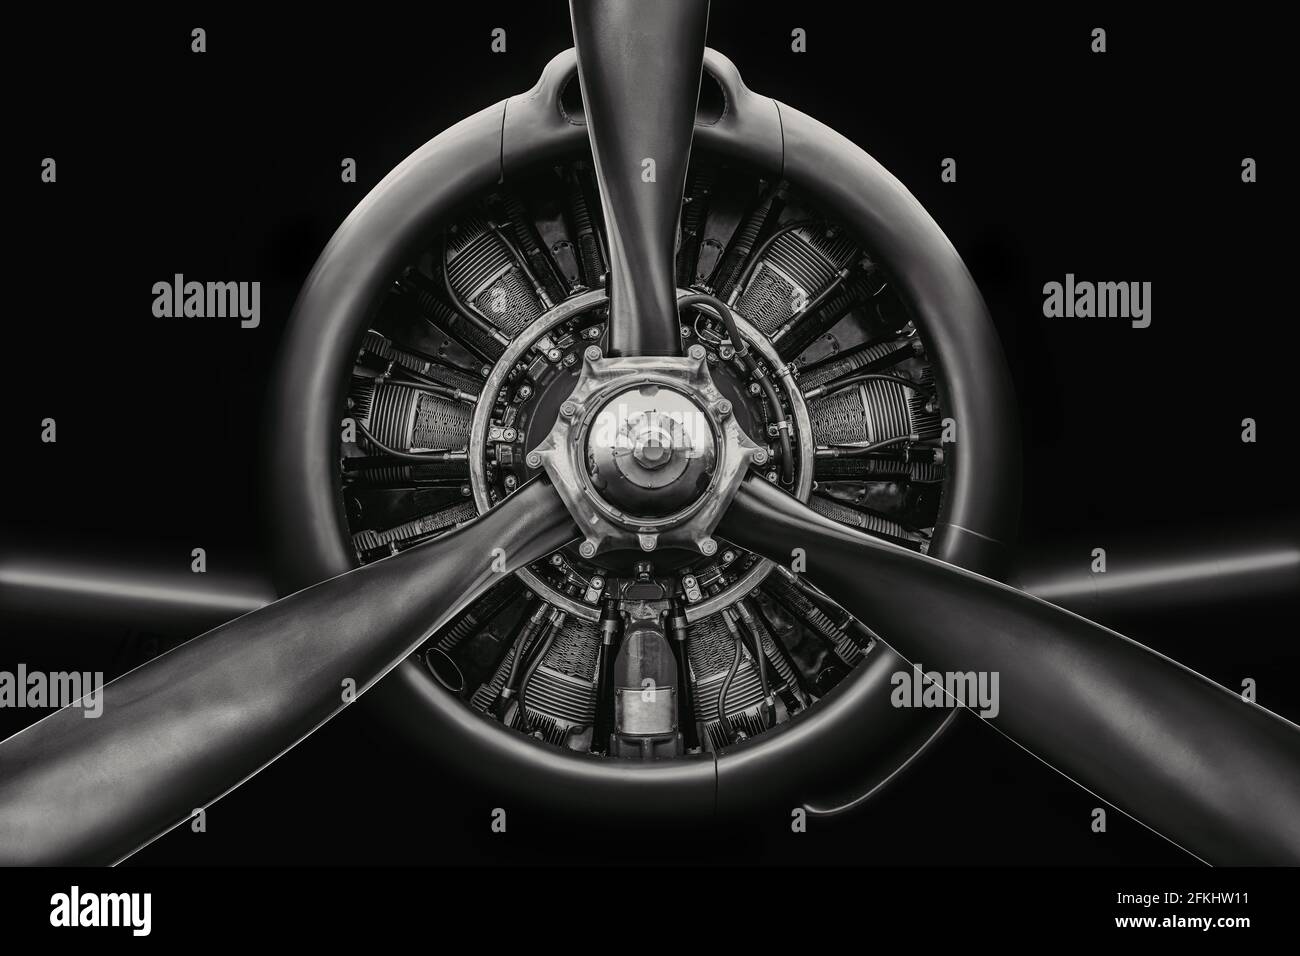 low key picture of an aircraft radial engine Stock Photo